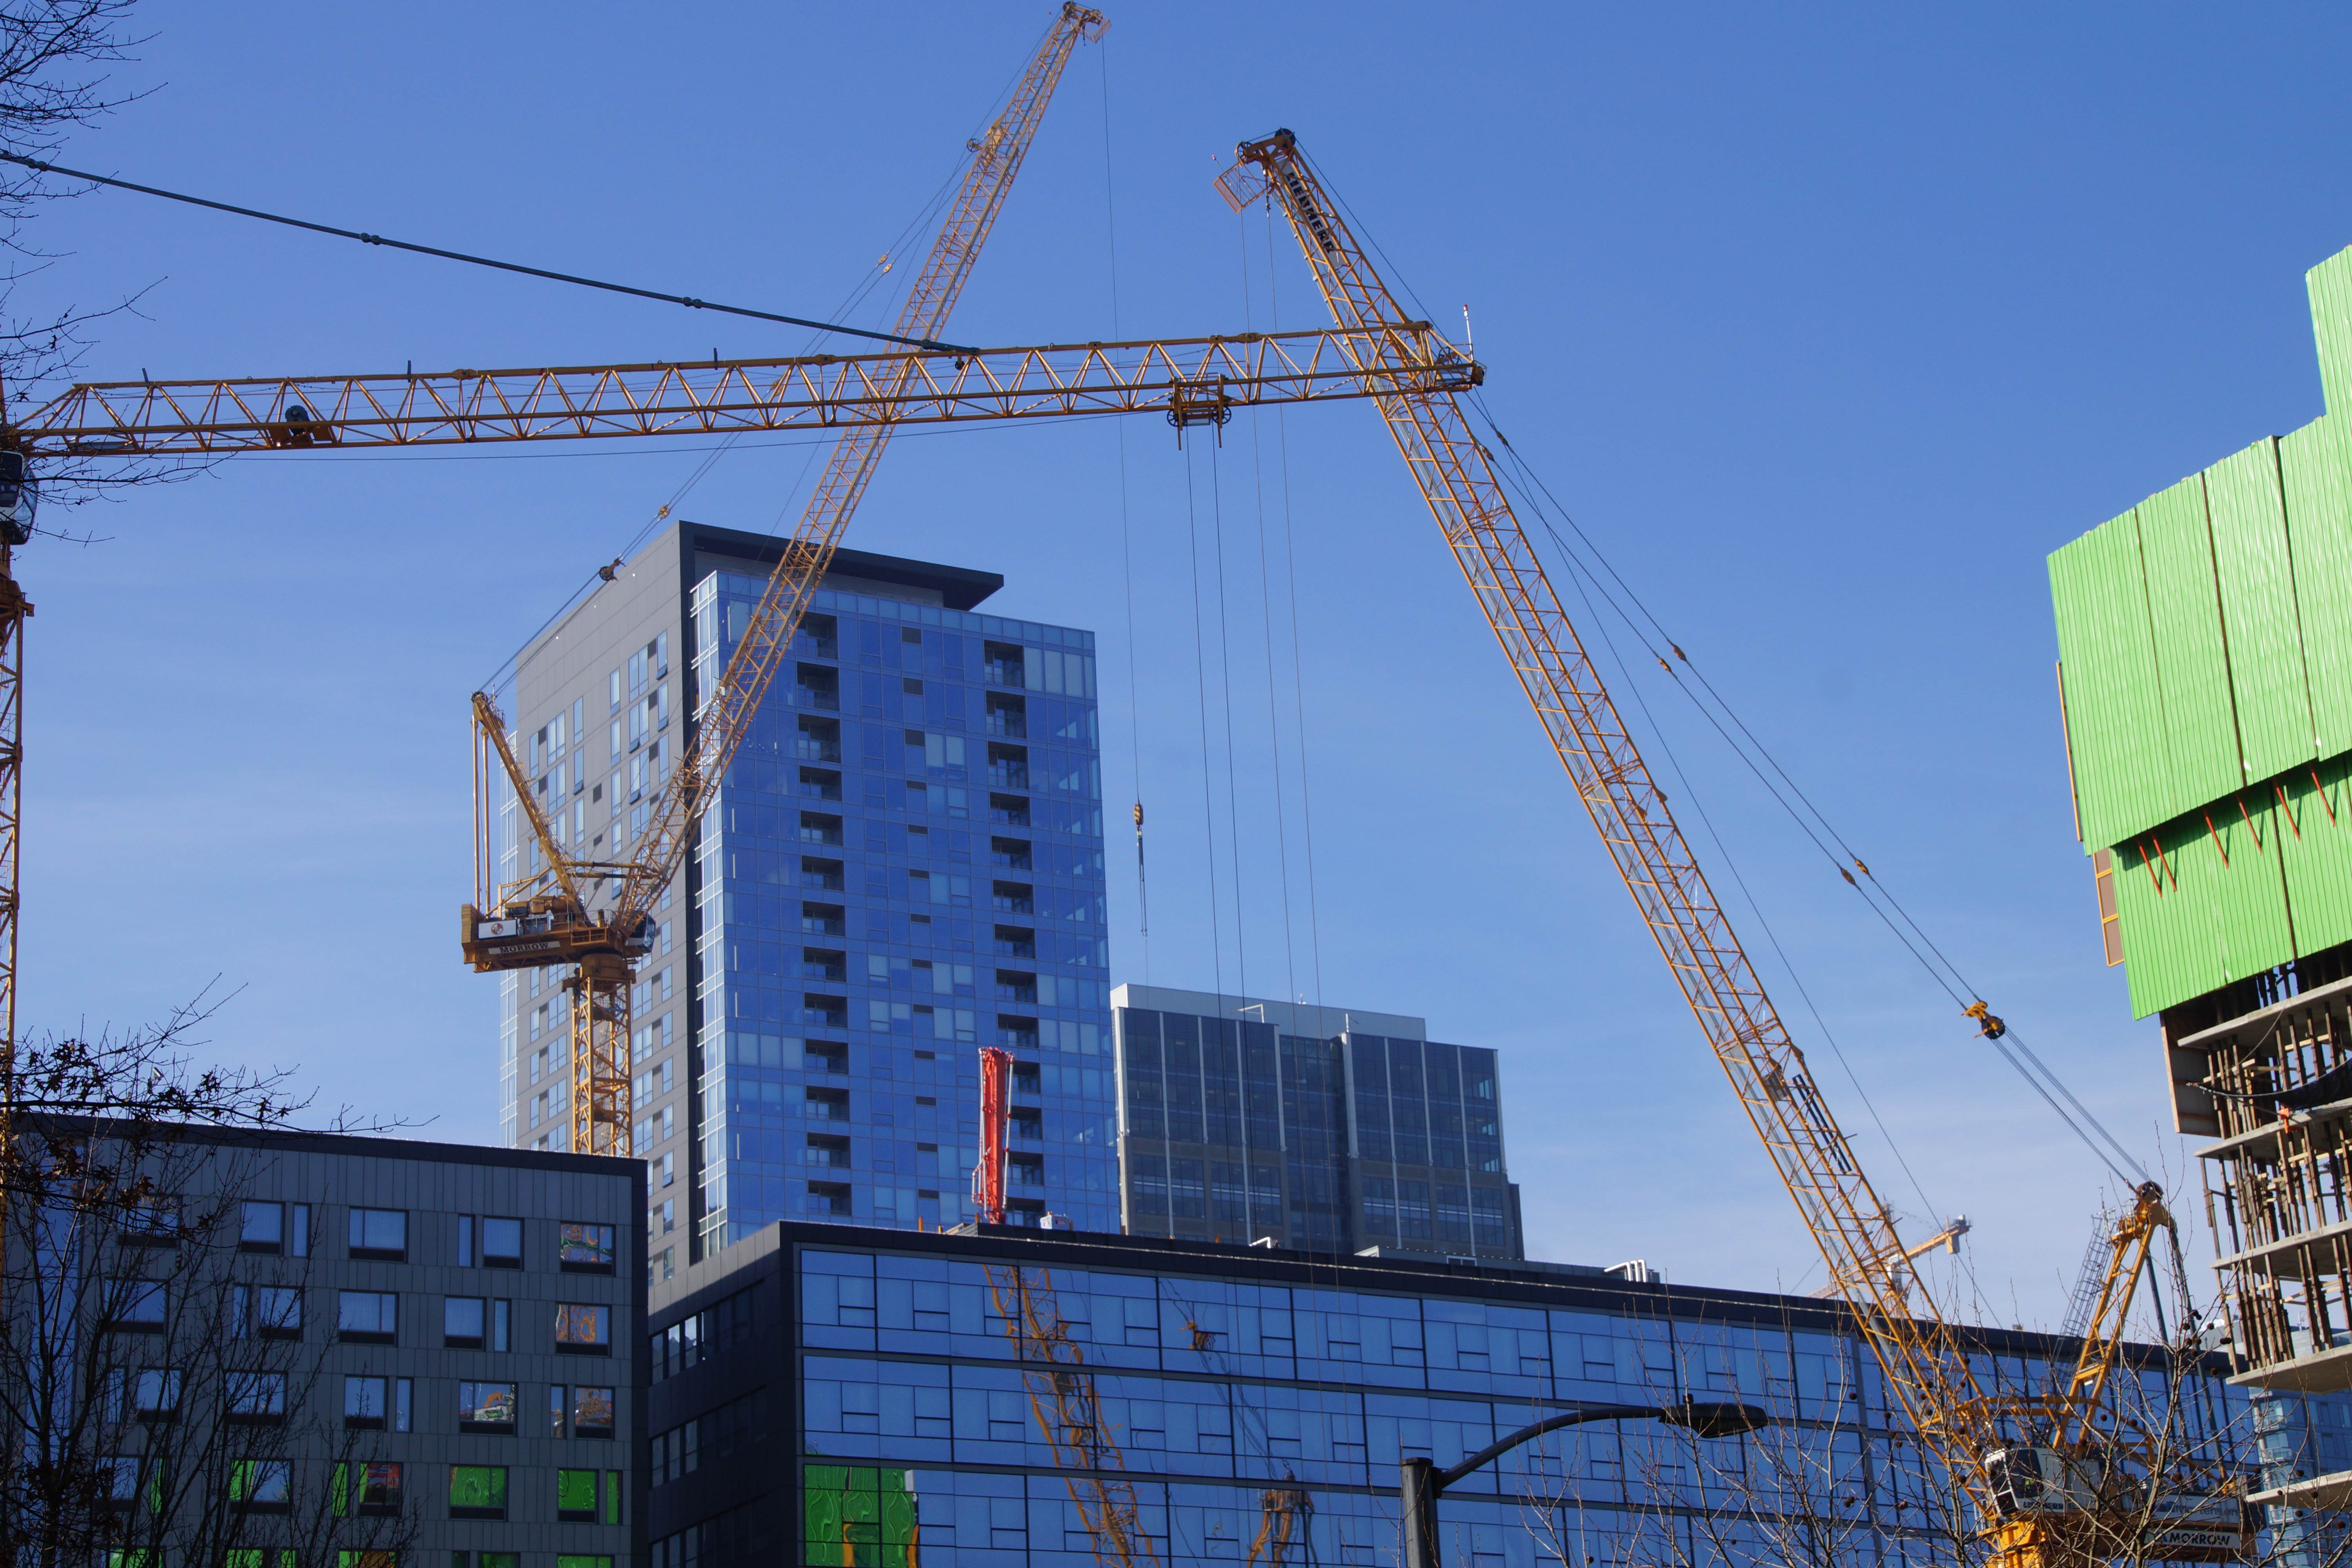 The downtown Seattle skyline reflects a surge of new development, as cranes hearken in new buildings amidst downtown Seattle's high-rises.